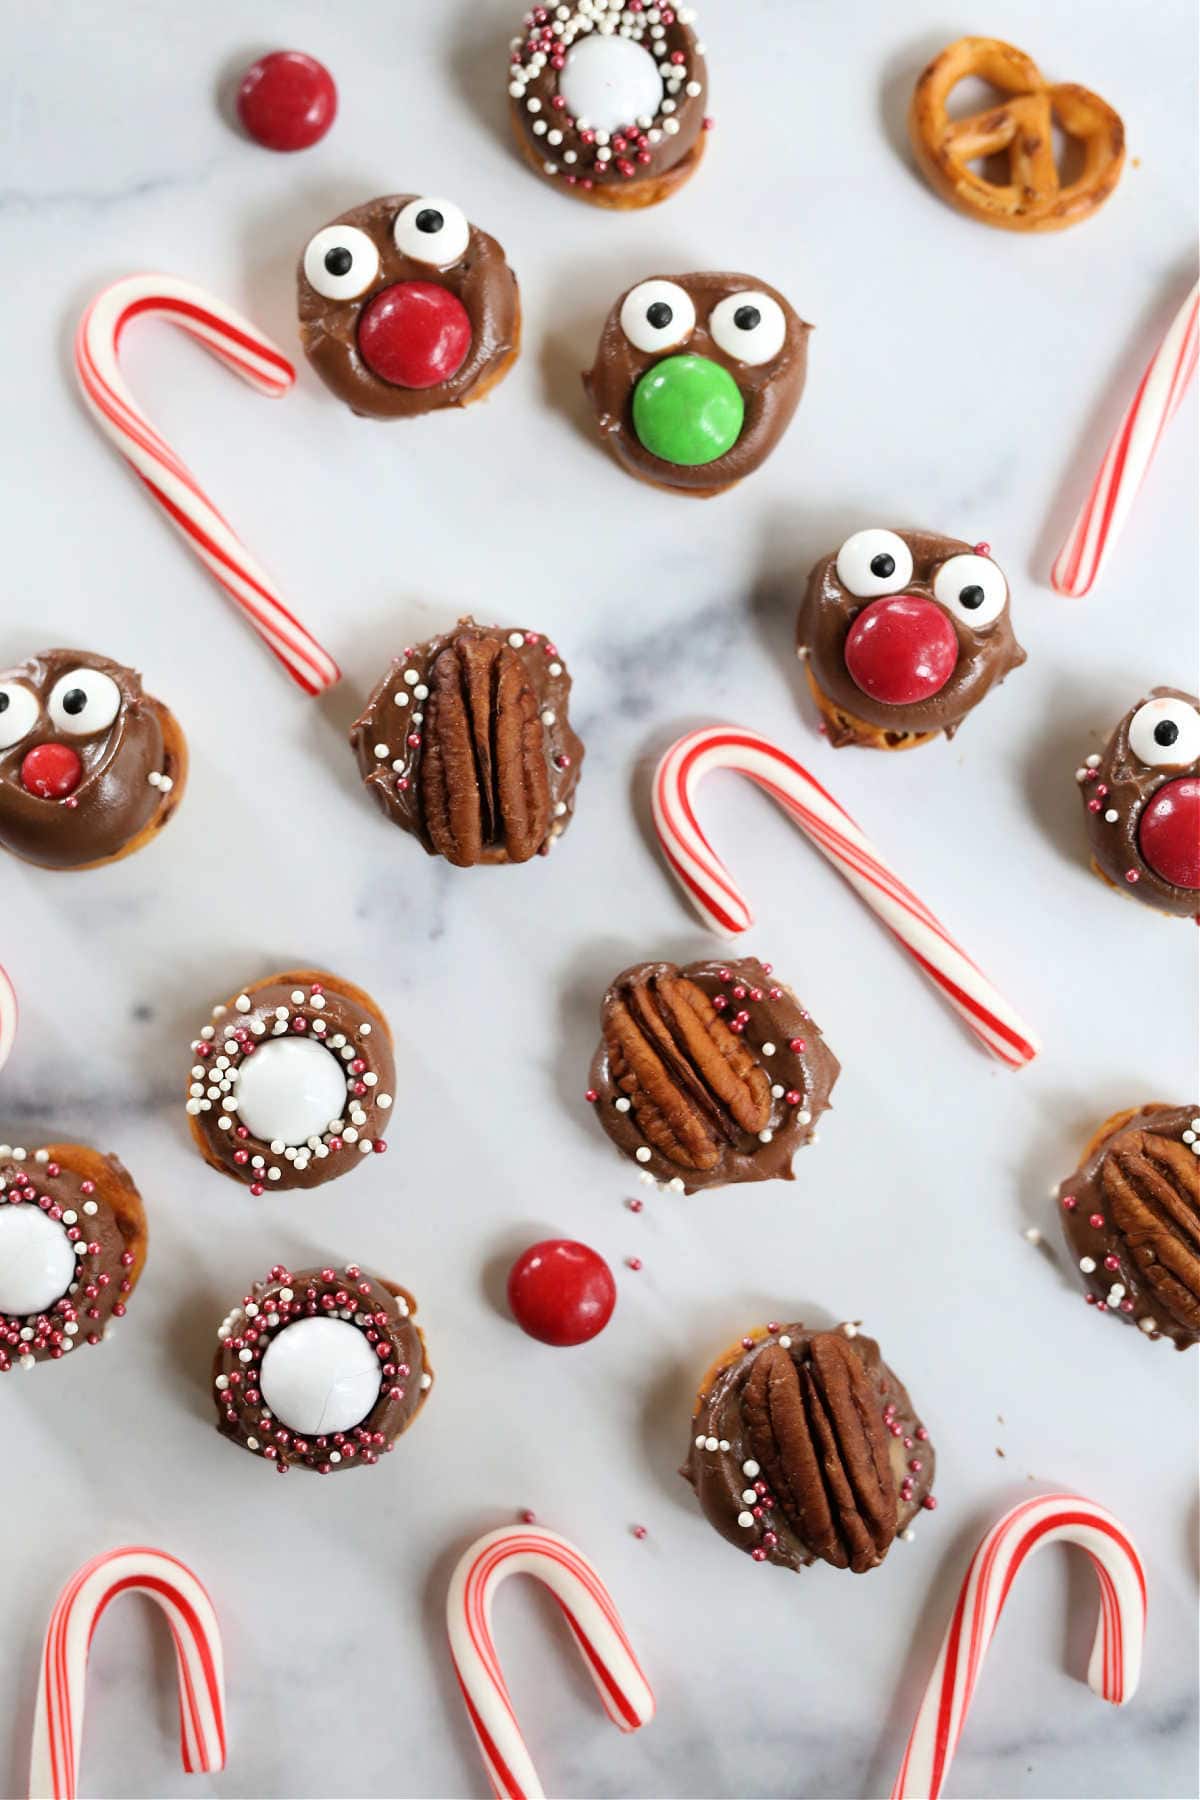 rolo candy and chocolate caramel candies topped on pretzels with pecans and candy decorations on a marble surface surrounded by candy canes